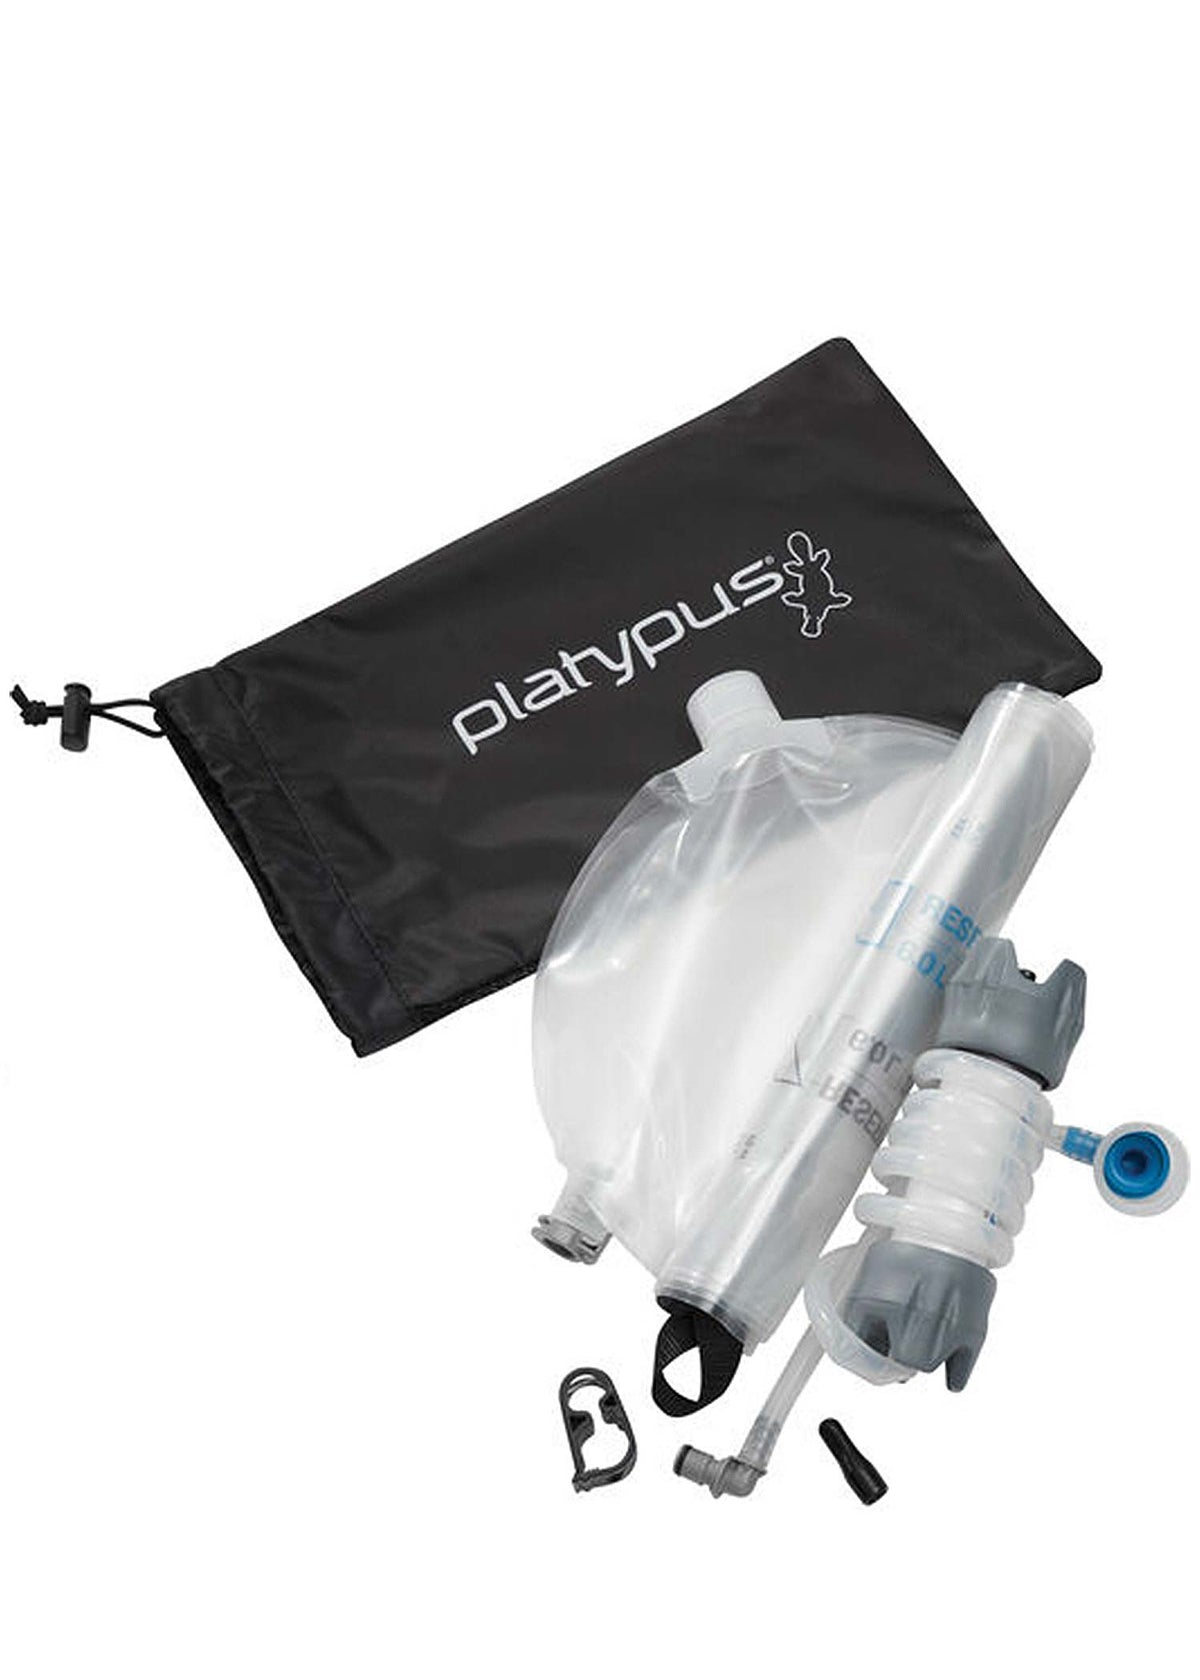 Platypus Gravity Works 4L Water Filter System